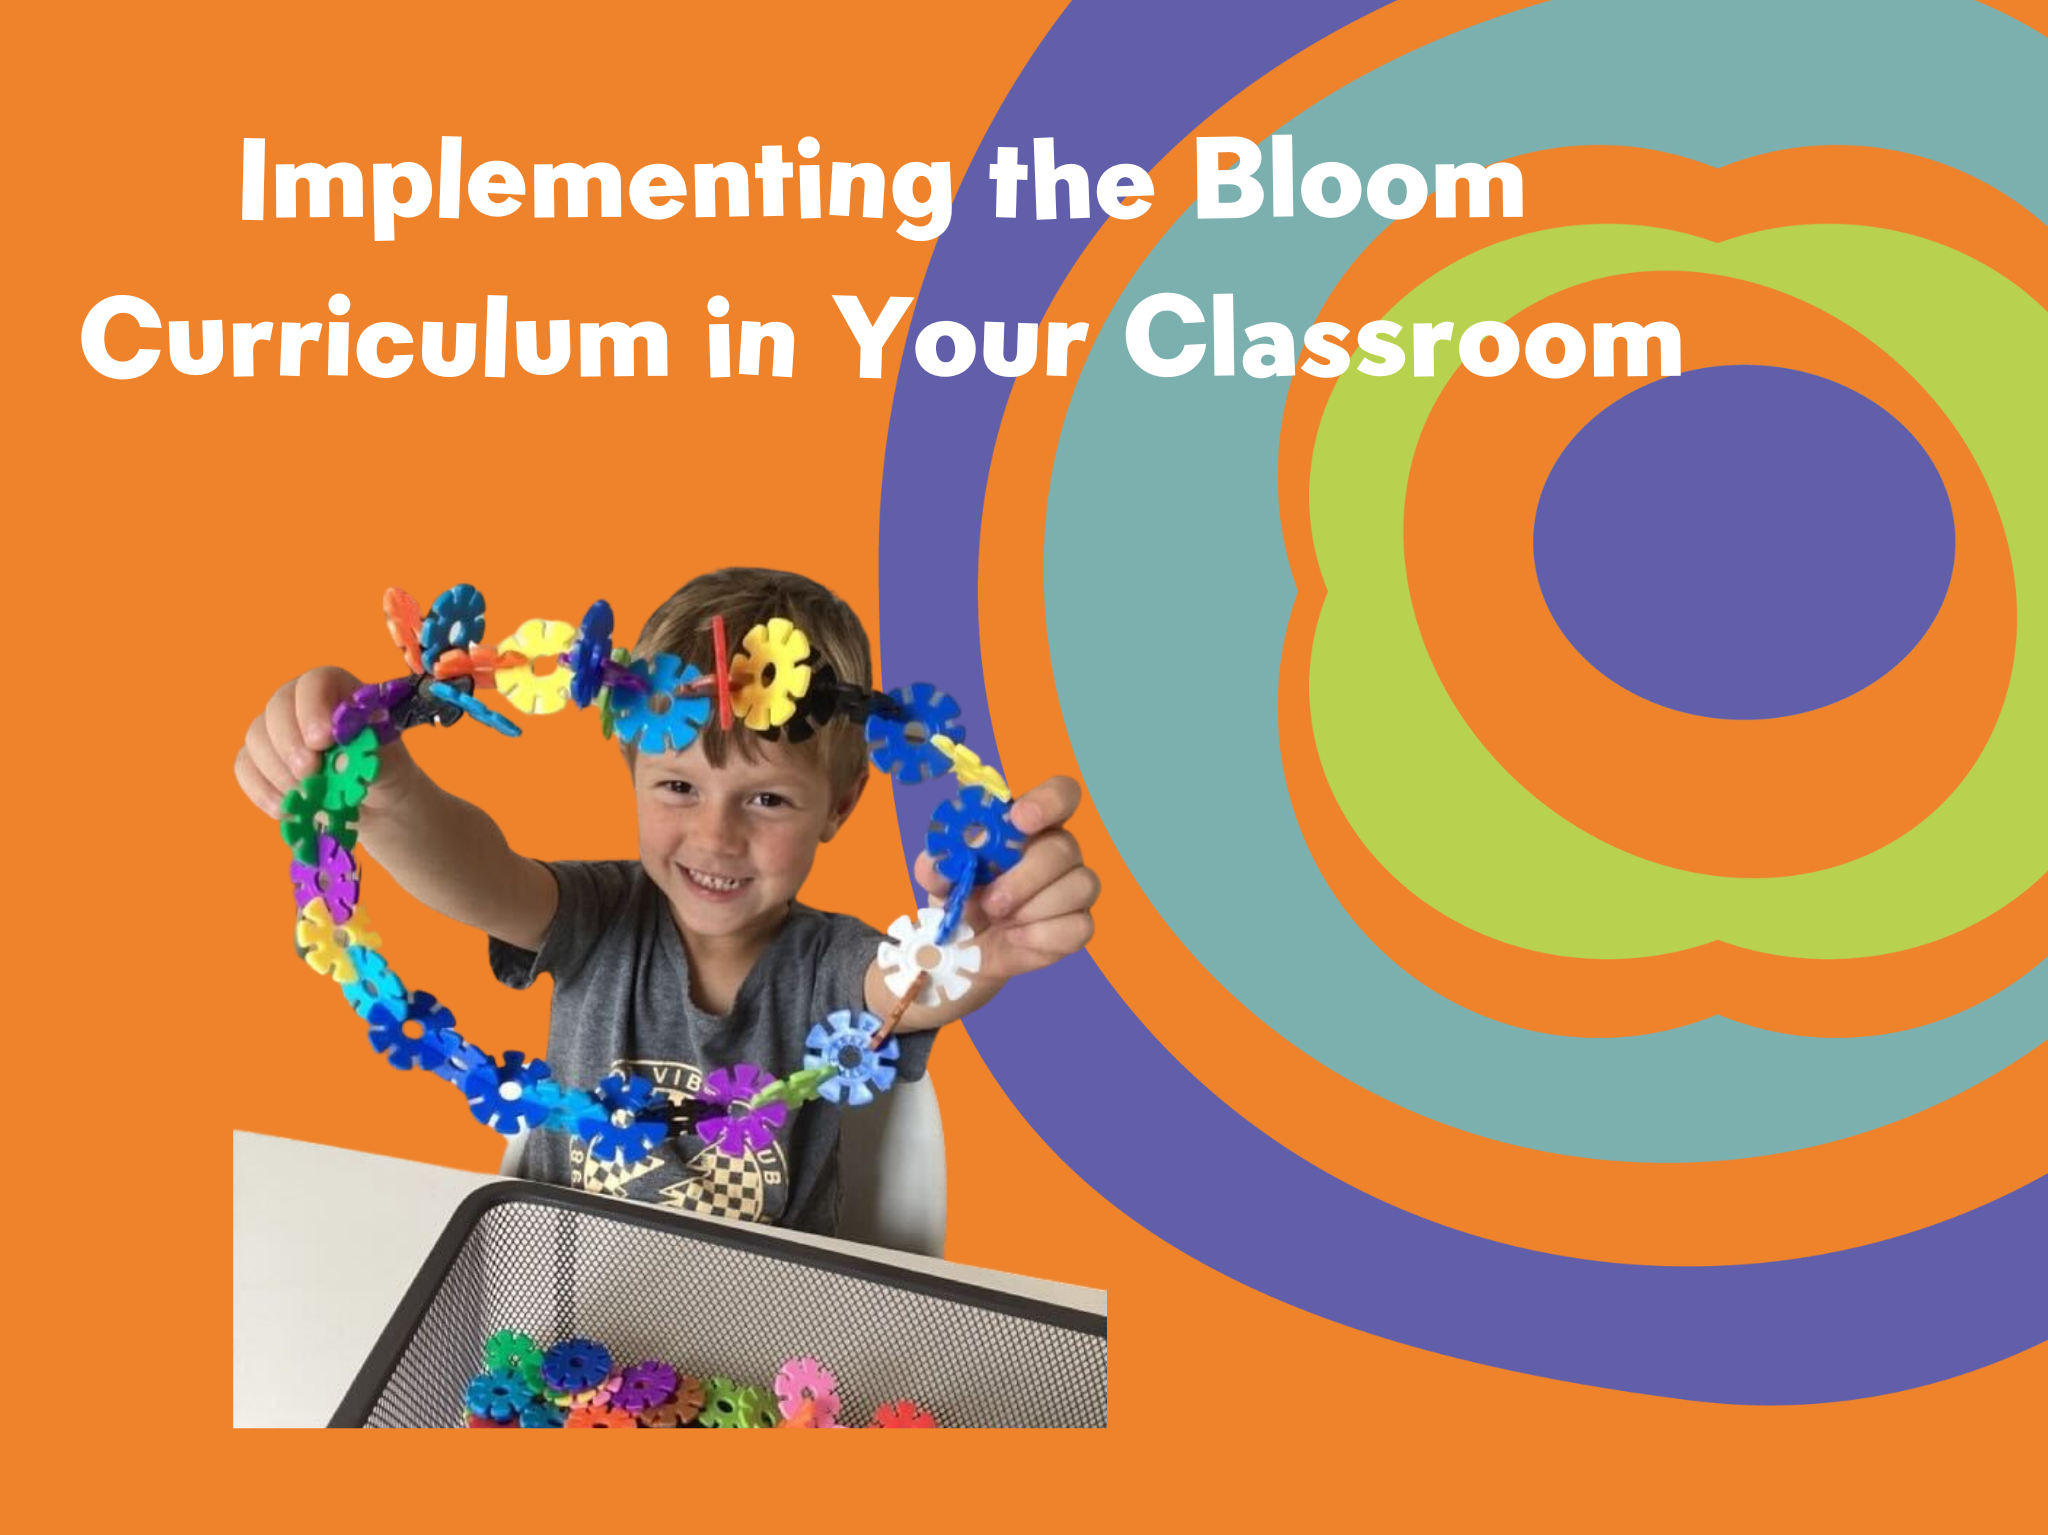 Implementing the Bloom Curriculum in Your Classroom